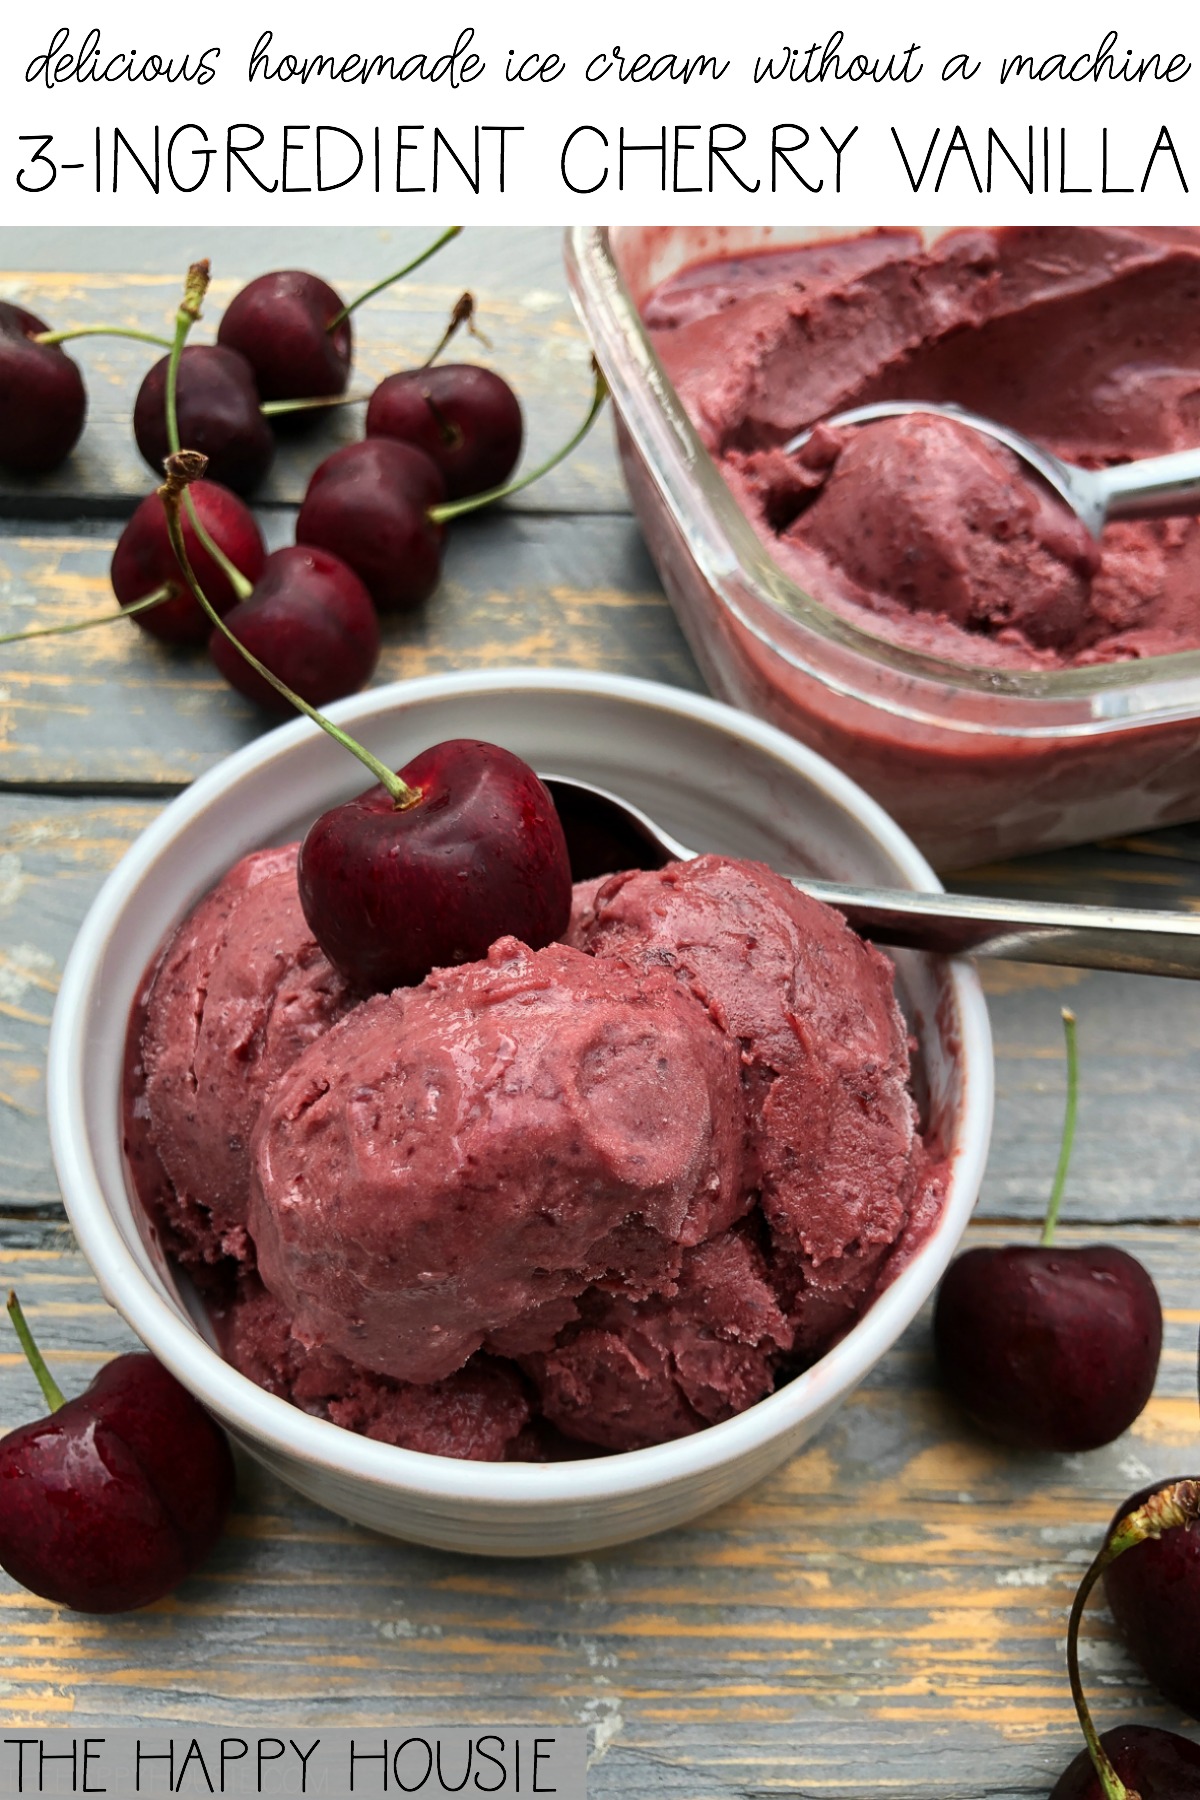 A white bowl filled with cherry vanilla ice cream and cherries beside it.